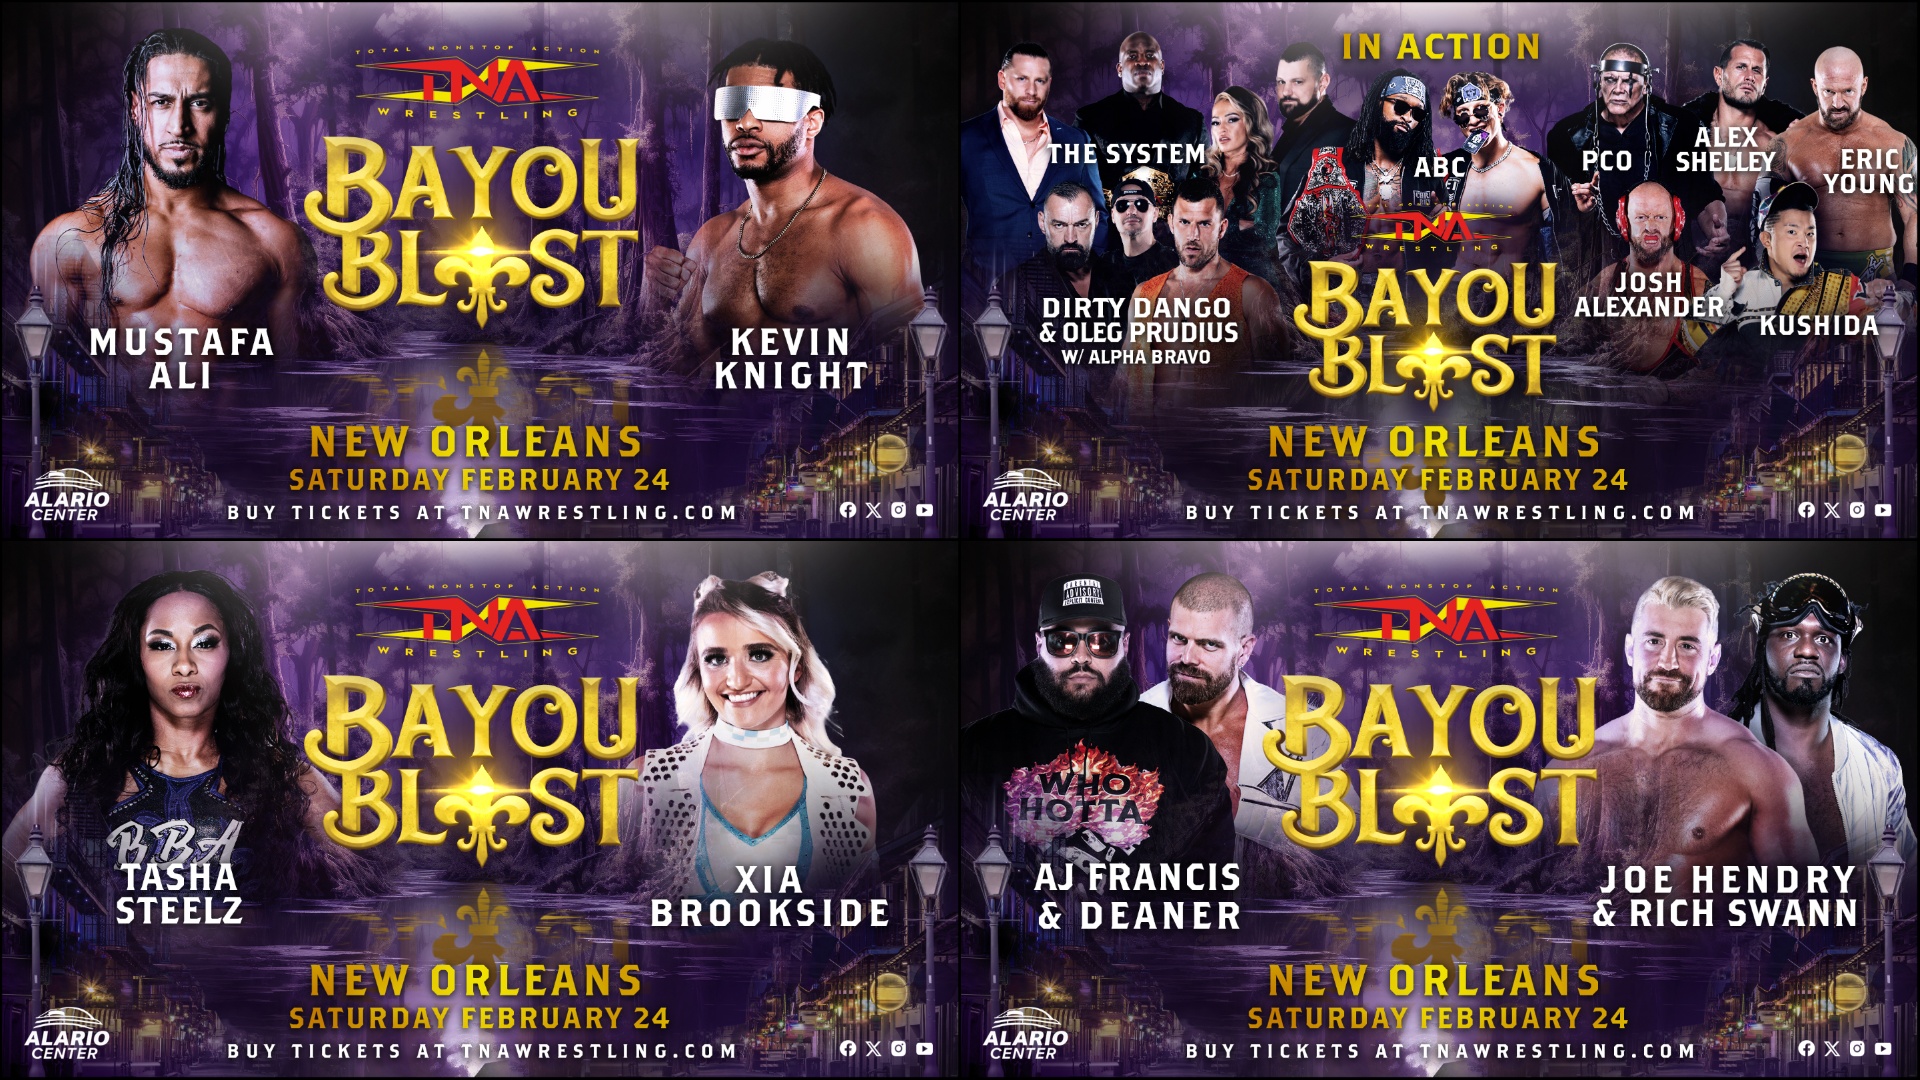 New Orleans! See Your Favorite TNA Stars in Action This Saturday at Bayou Blast – TNA Wrestling